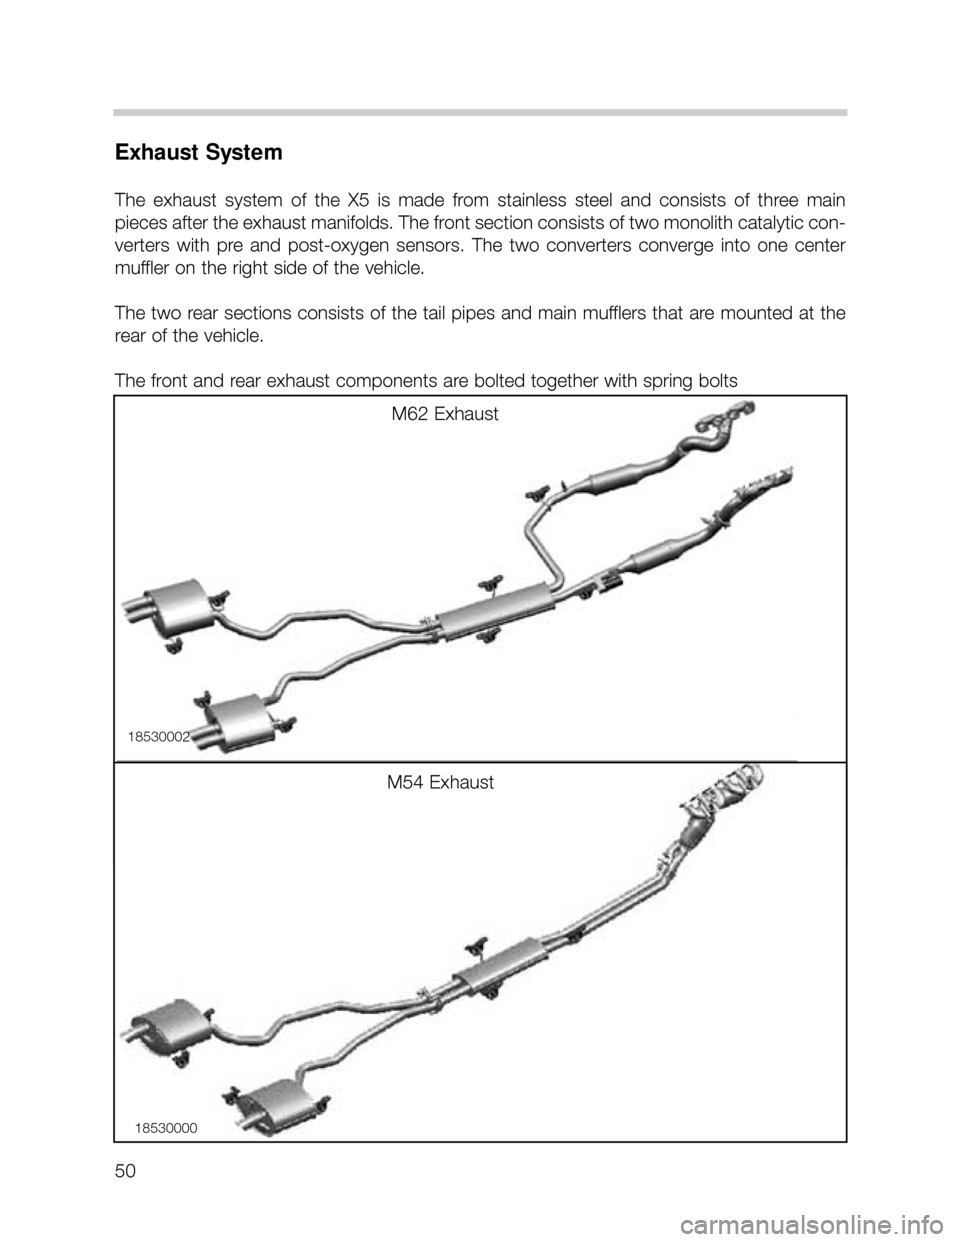 BMW X5 2006 E53 Workshop Manual 50
Exhaust System
The  exhaust  system  of  the  X5  is  made  from  stainless  steel  and  consists  of  three  main
pieces after the exhaust manifolds. The front section consists of two monolith cat